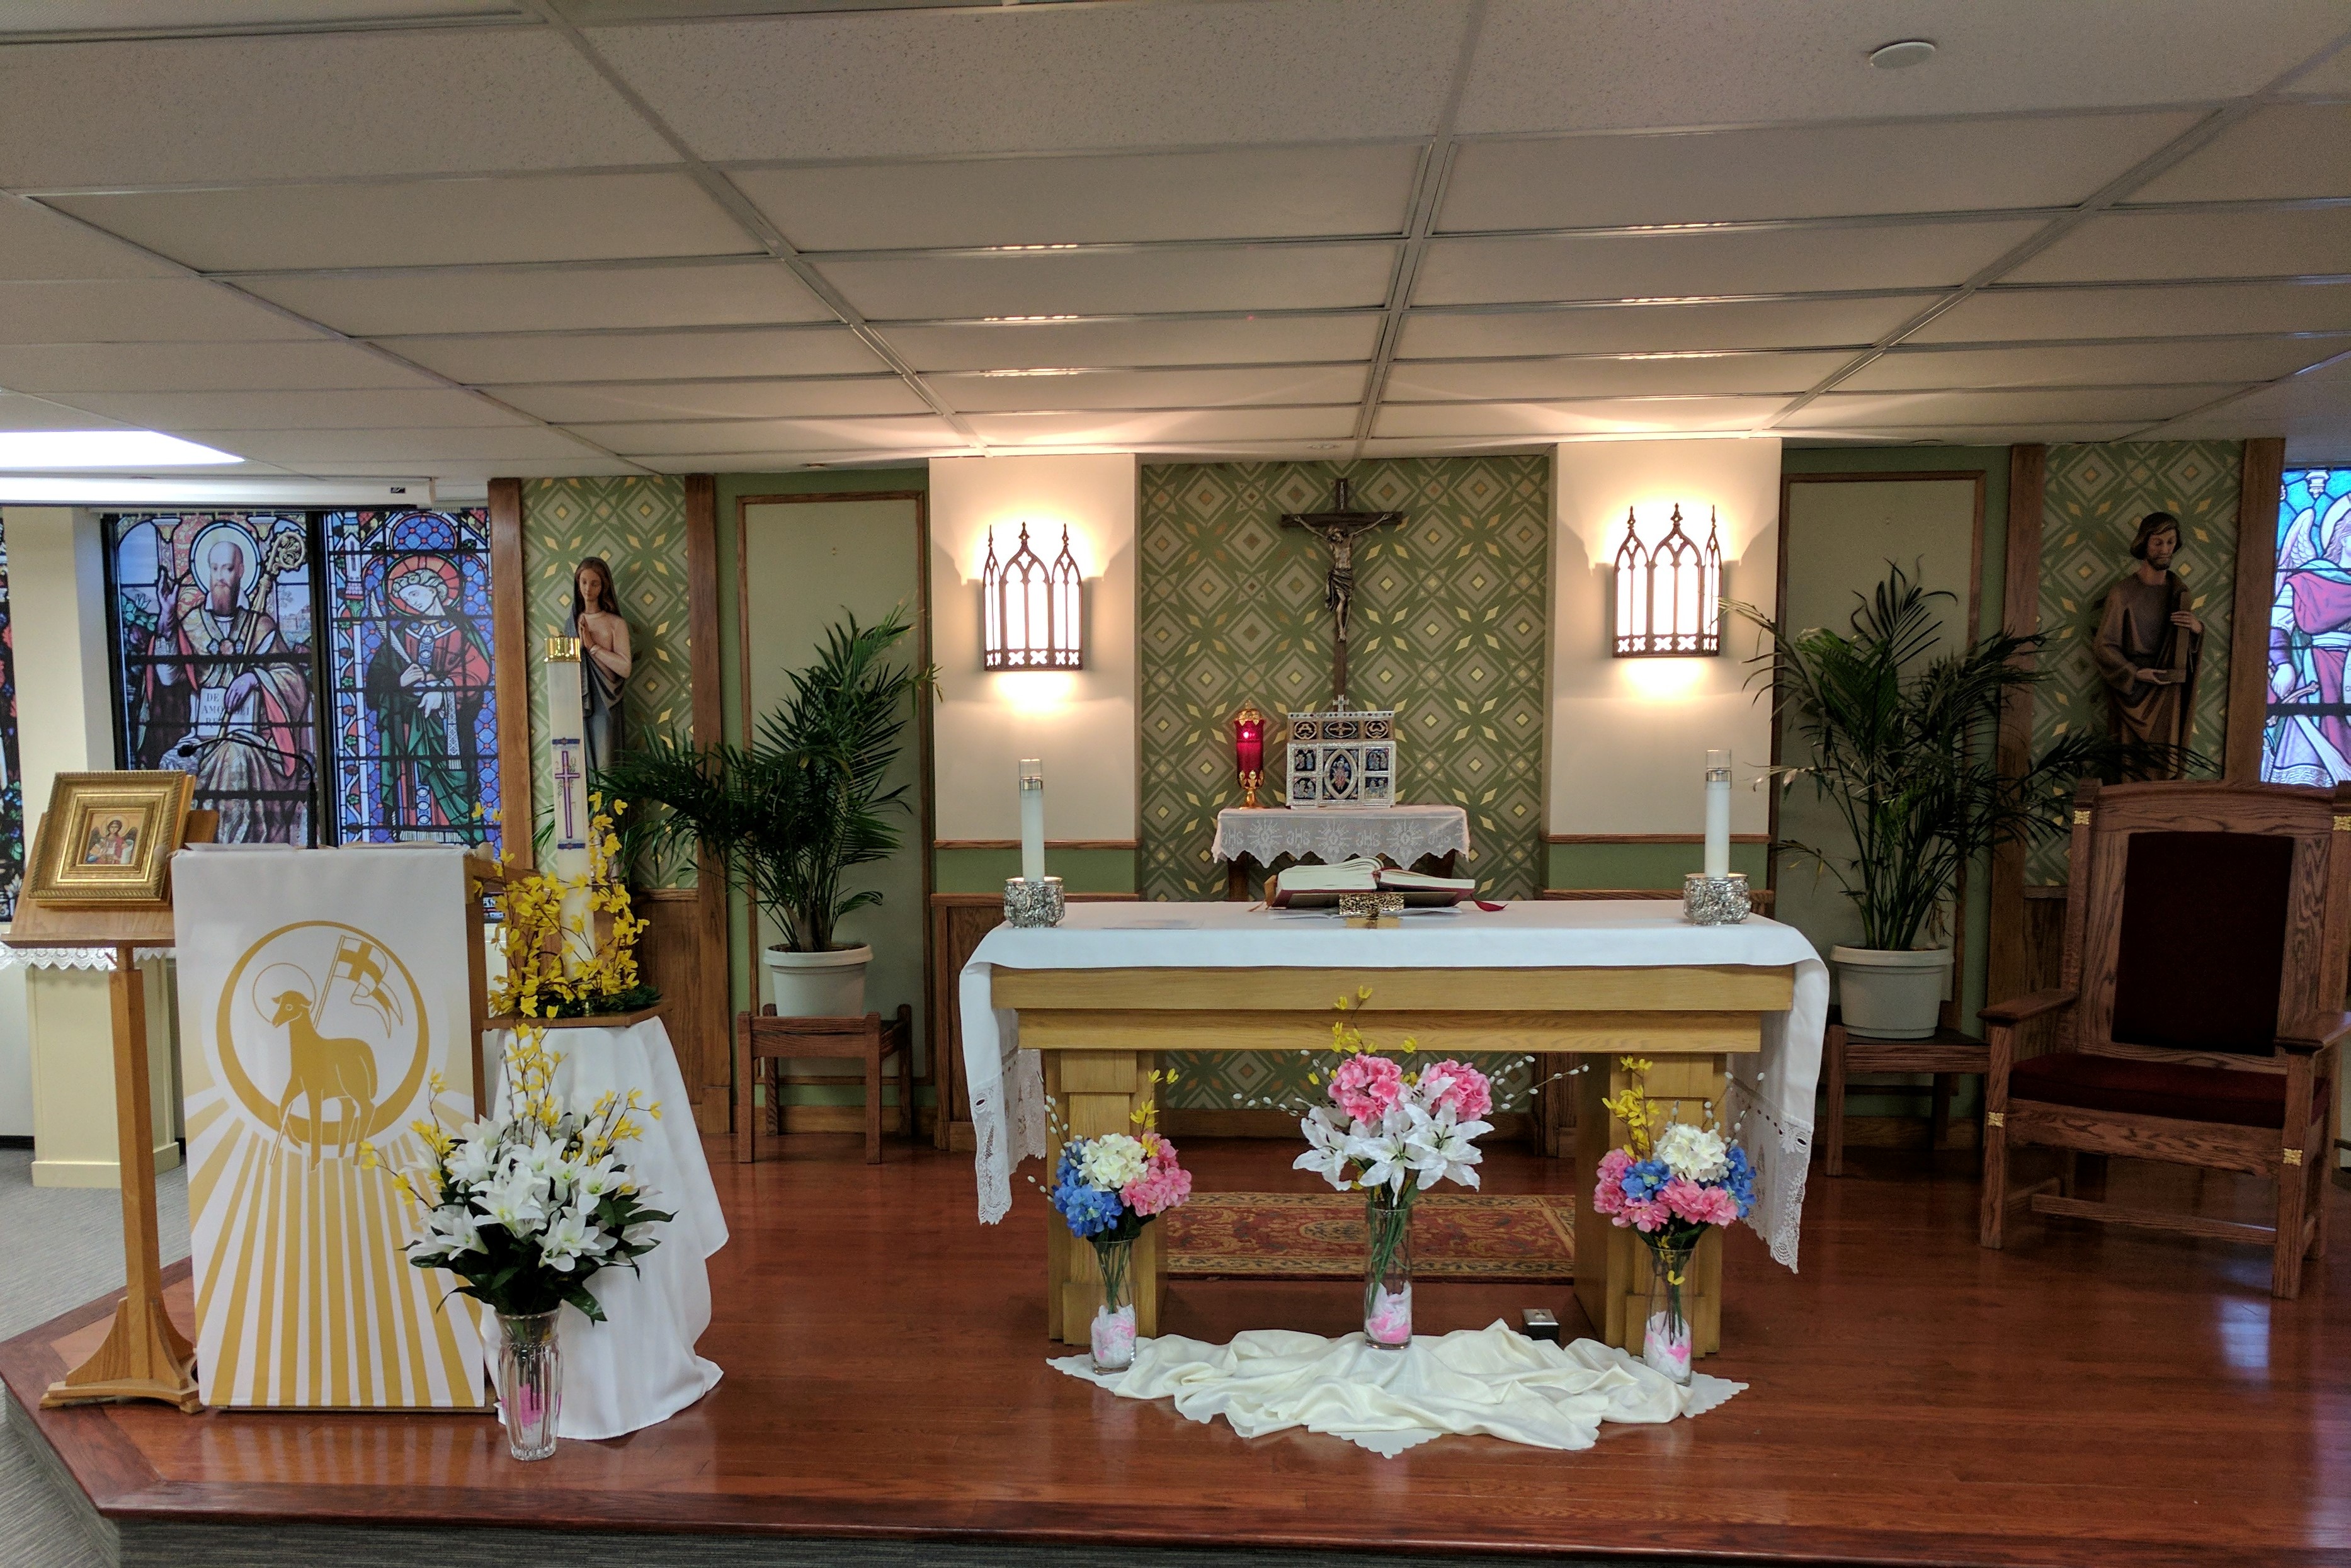 A photo of our sanctuary during Easter